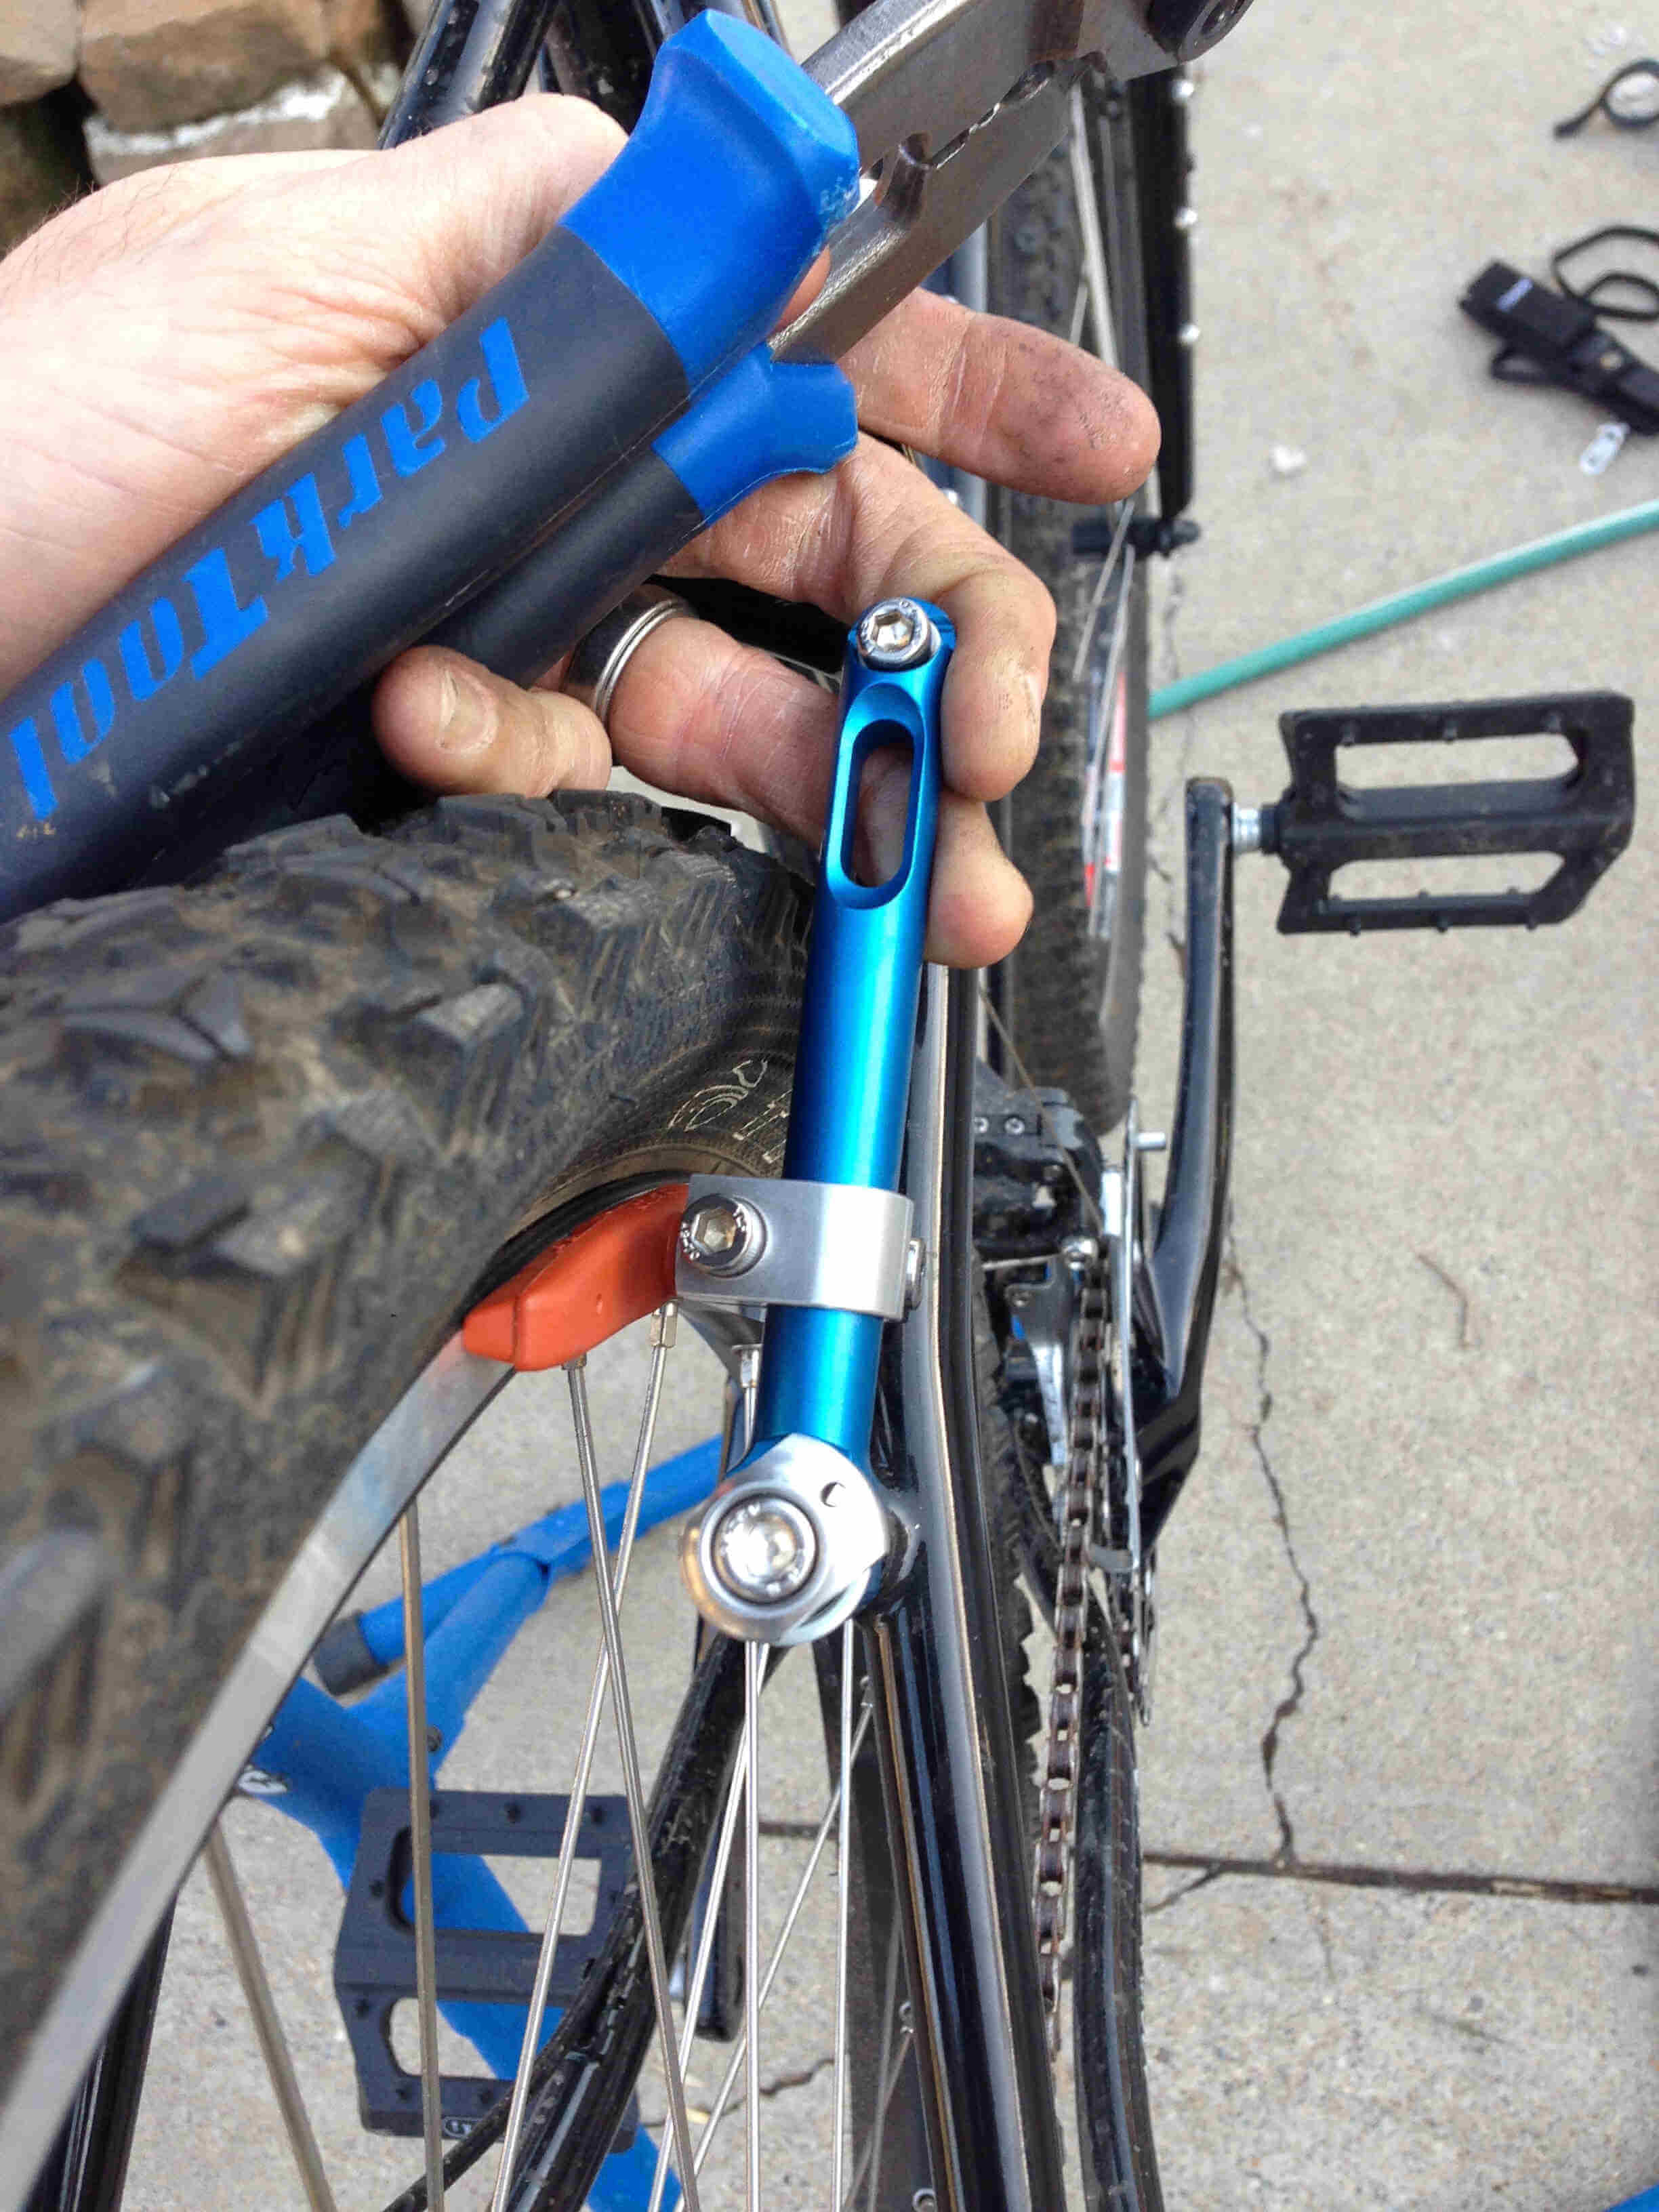 Rear, close up view of a person hand holding the rear, right side, brake caliper on a black Surly Troll bike